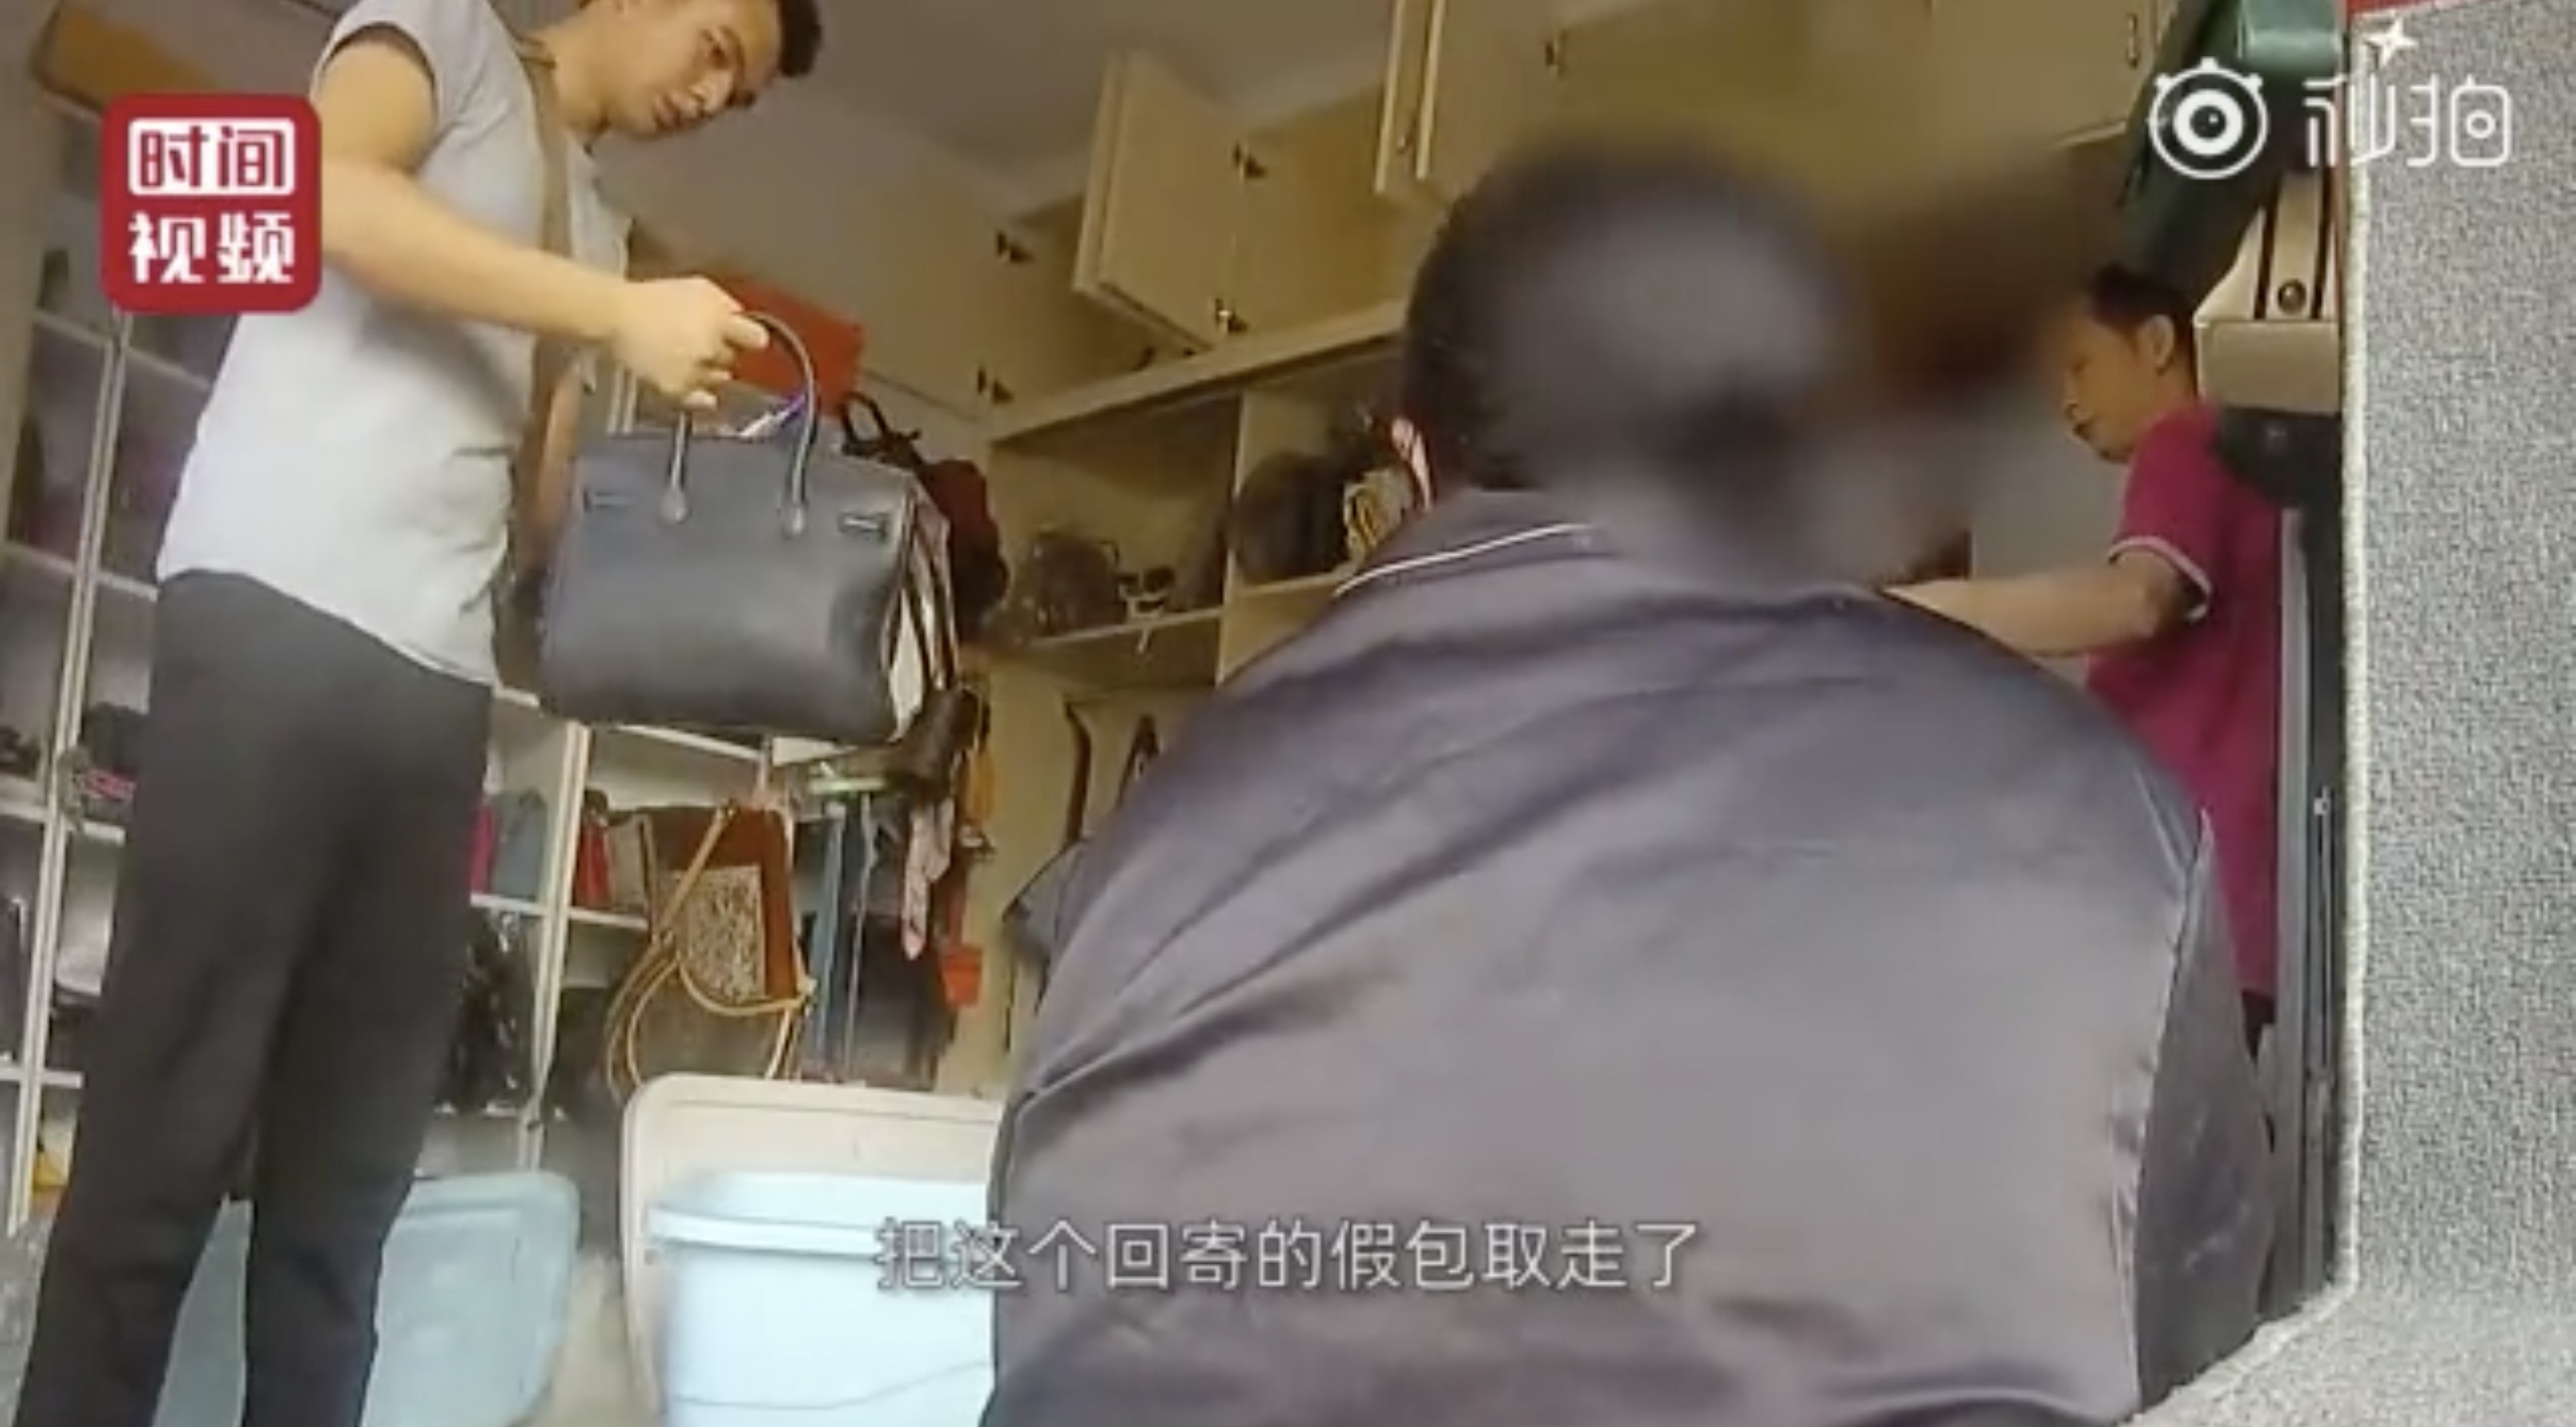 Chinese fake goods seller caught after her mother used 'Louis